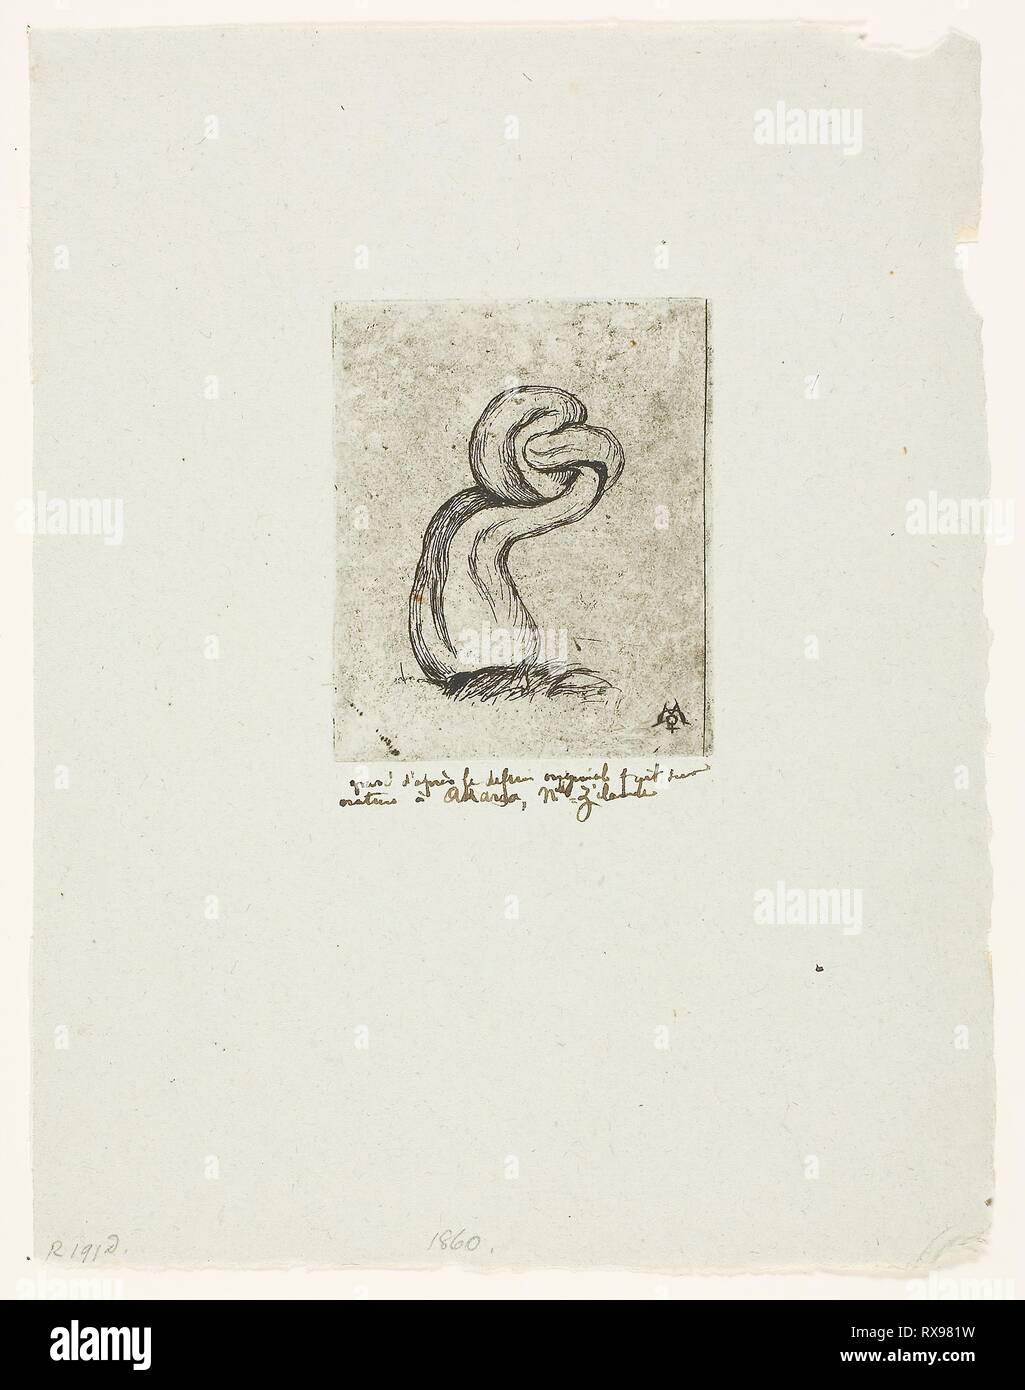 The Sickly Cryptogam. Charles Meryon; French, 1821-1868. Date: 1860. Dimensions: 71 × 59 mm (image); 71 × 59 mm (plate); 193 × 151 mm (sheet). Etching with plate tone on blue-green laid paper with violet and red fibres. Origin: France. Museum: The Chicago Art Institute. Stock Photo